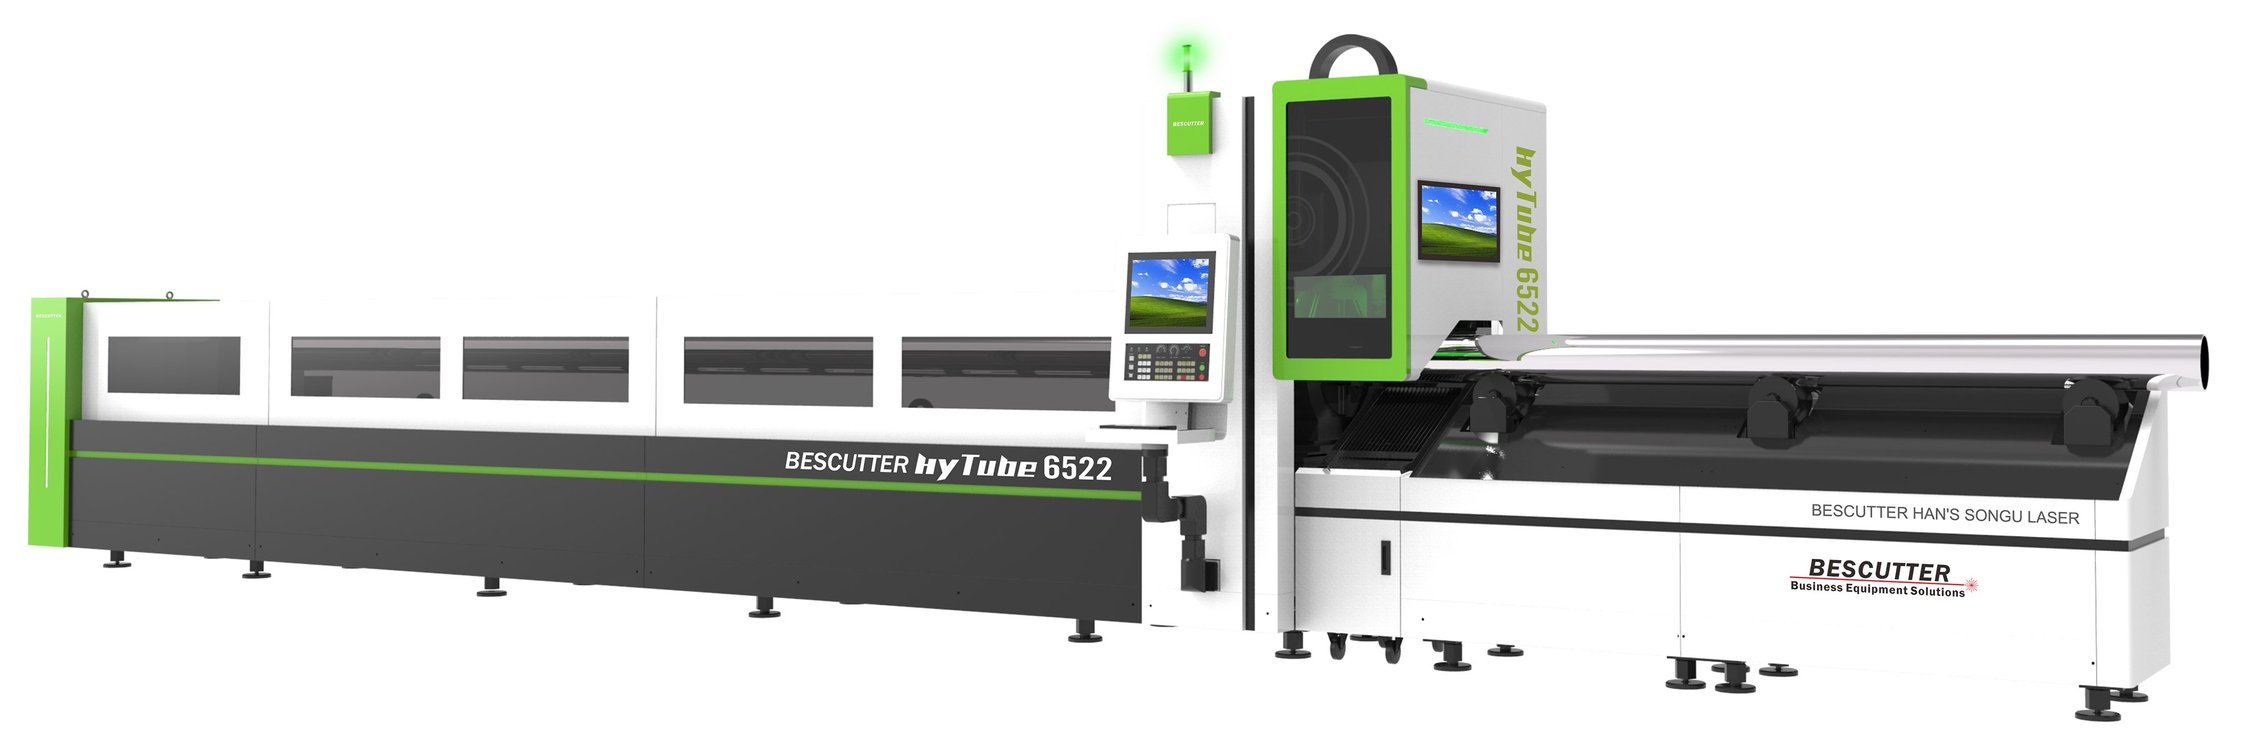 (4153) NEW Bescutter Hytube HT 6522 Laser Cutting System - Pic 1